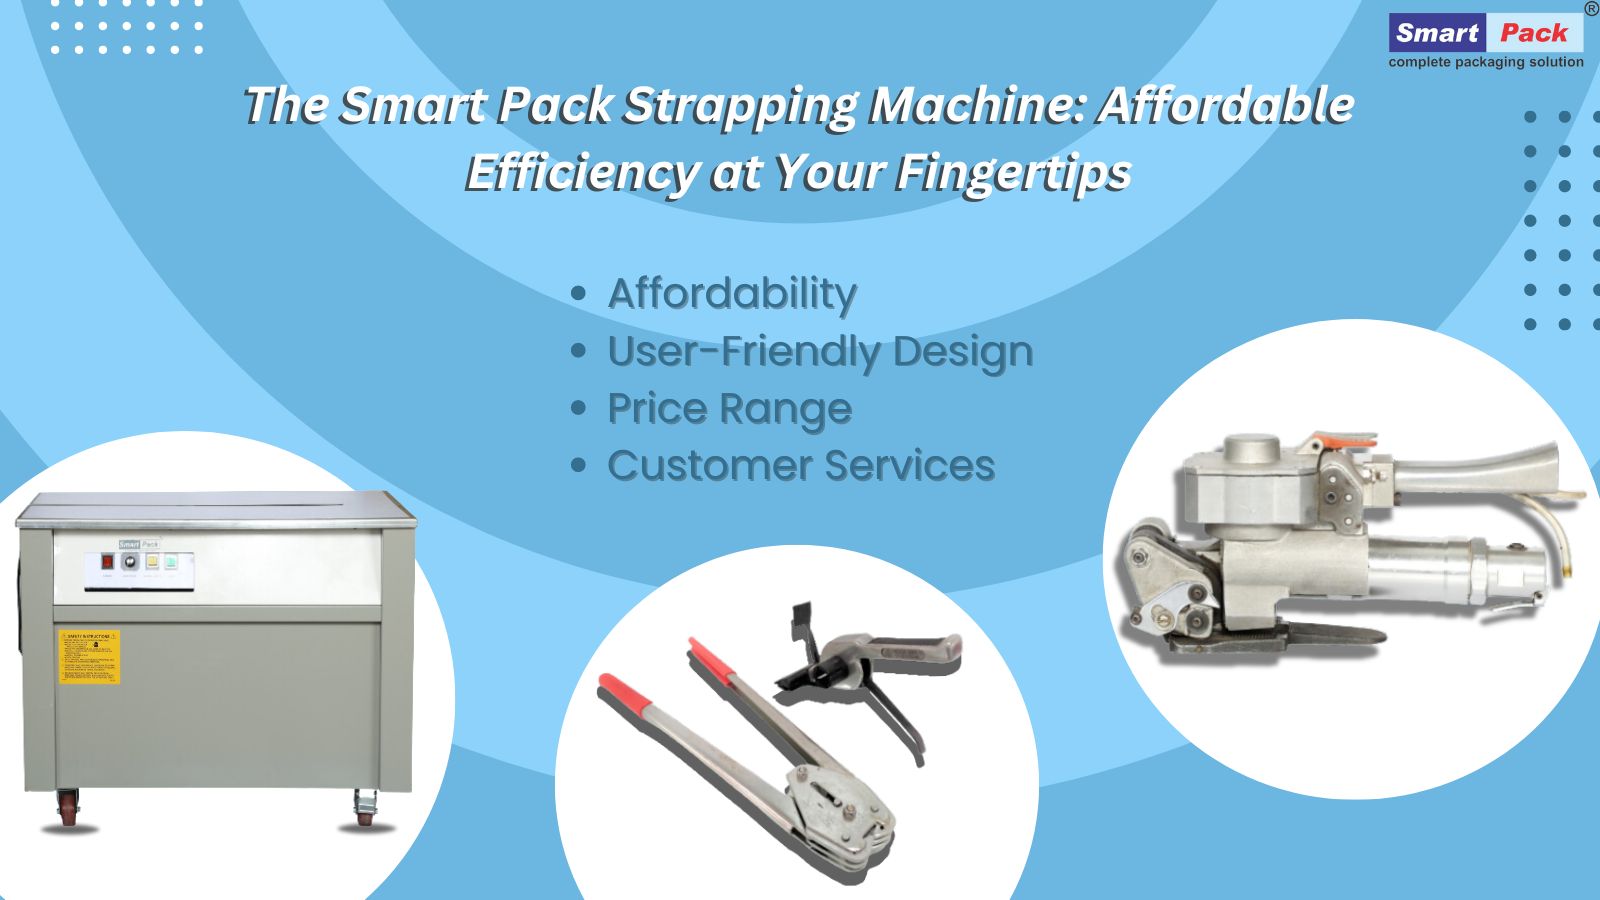 The Smart Pack Strapping Machine: Affordable Efficiency at Your Fingertips